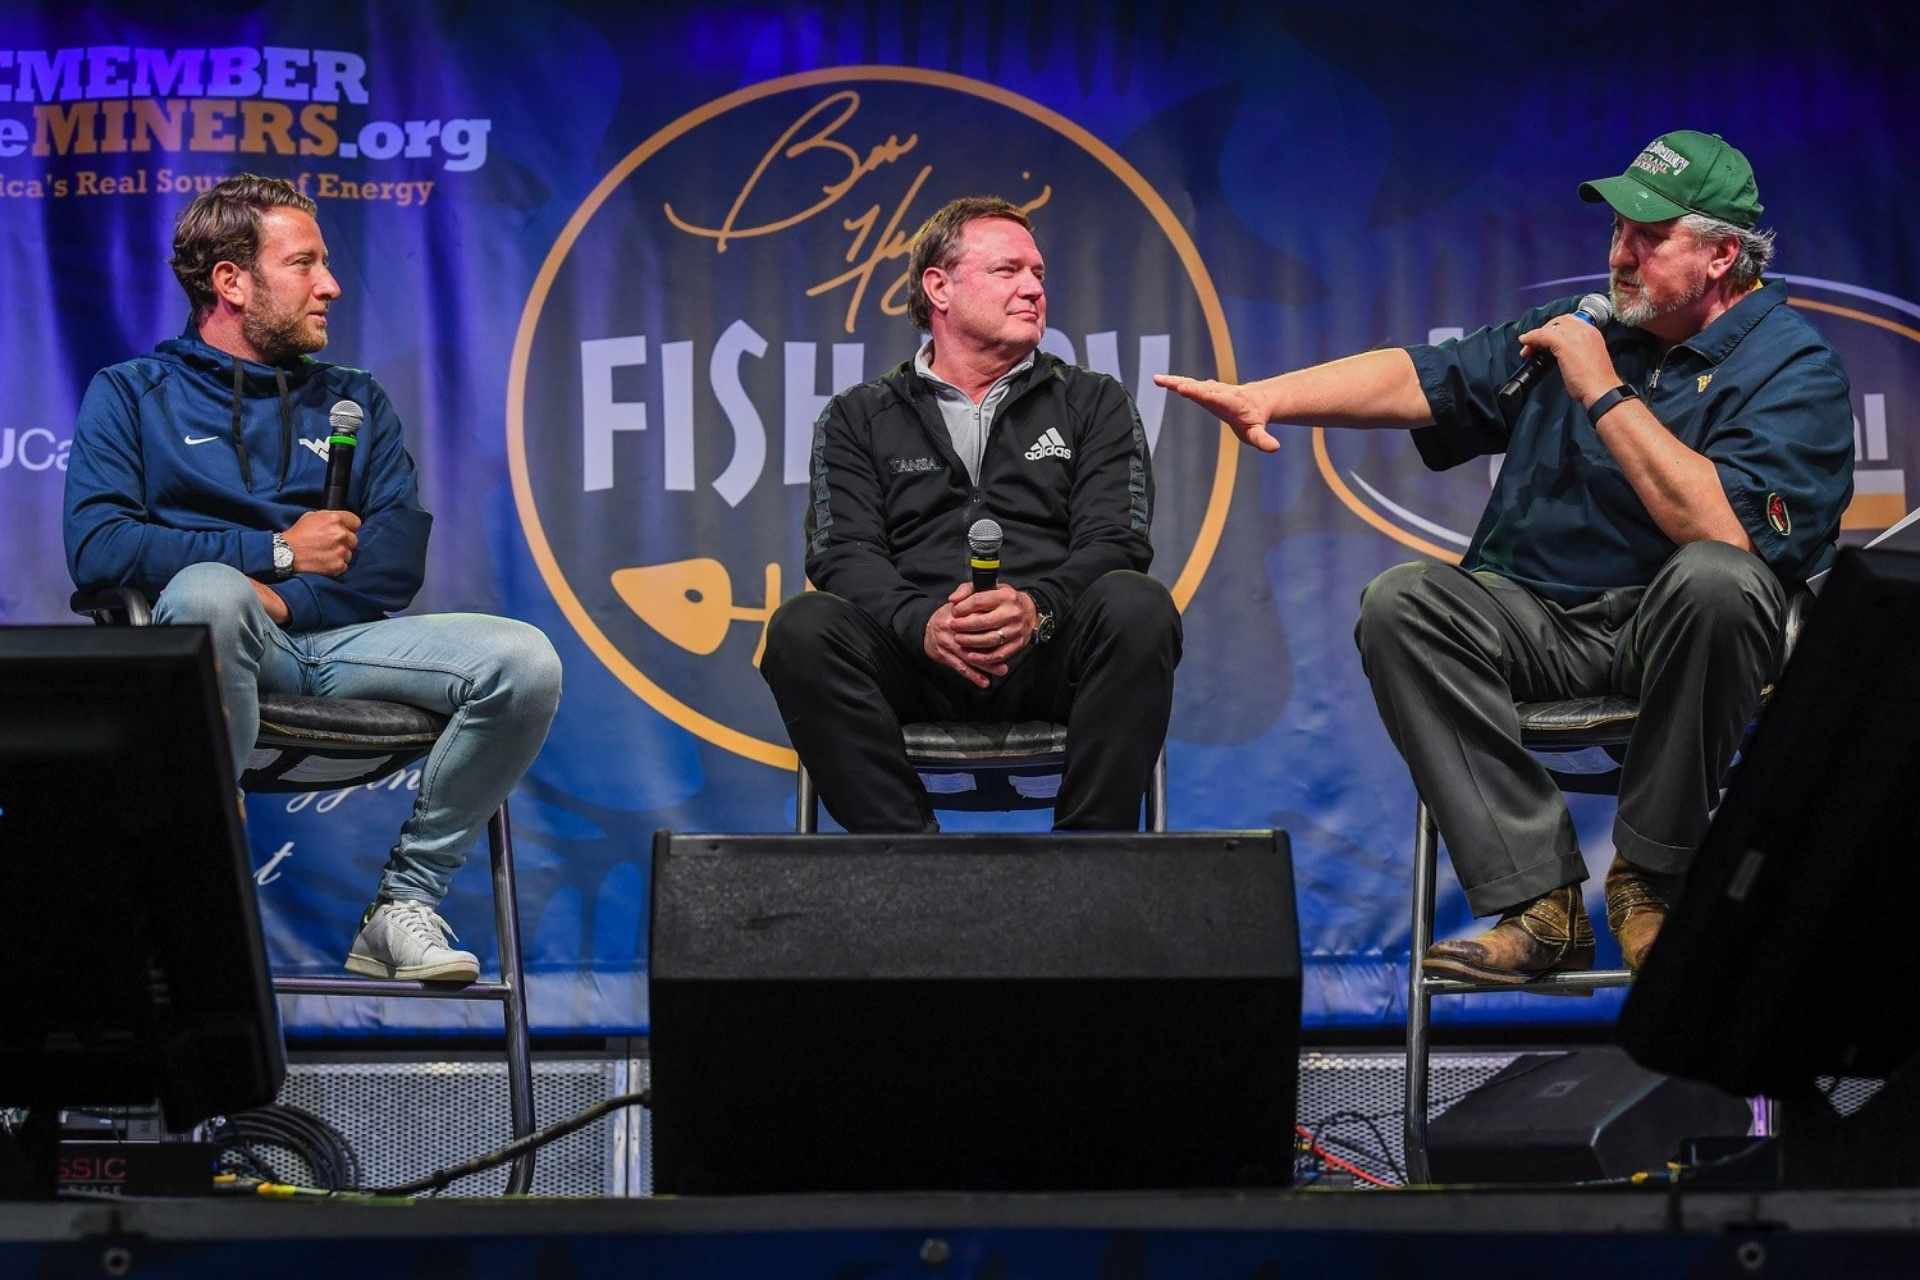 Barstool Sports founder Dave Portnoy (from left) and University of Kansas Men’s Basketball Coach Bill Self chat with WVU Men’s Basketball Coach Bob Huggins at the Fish Fry.